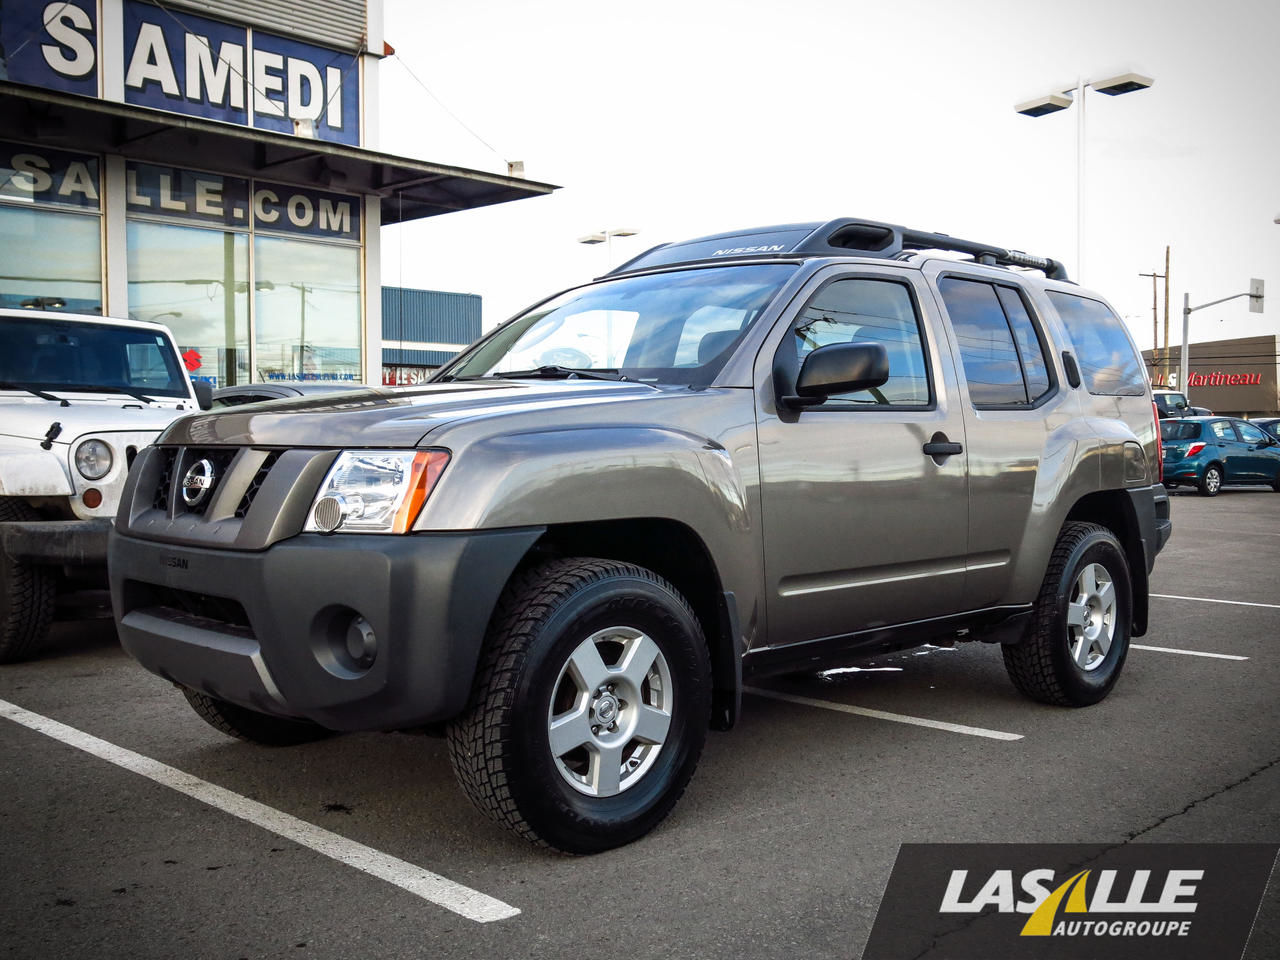 Price of a 2005 nissan xterra #1